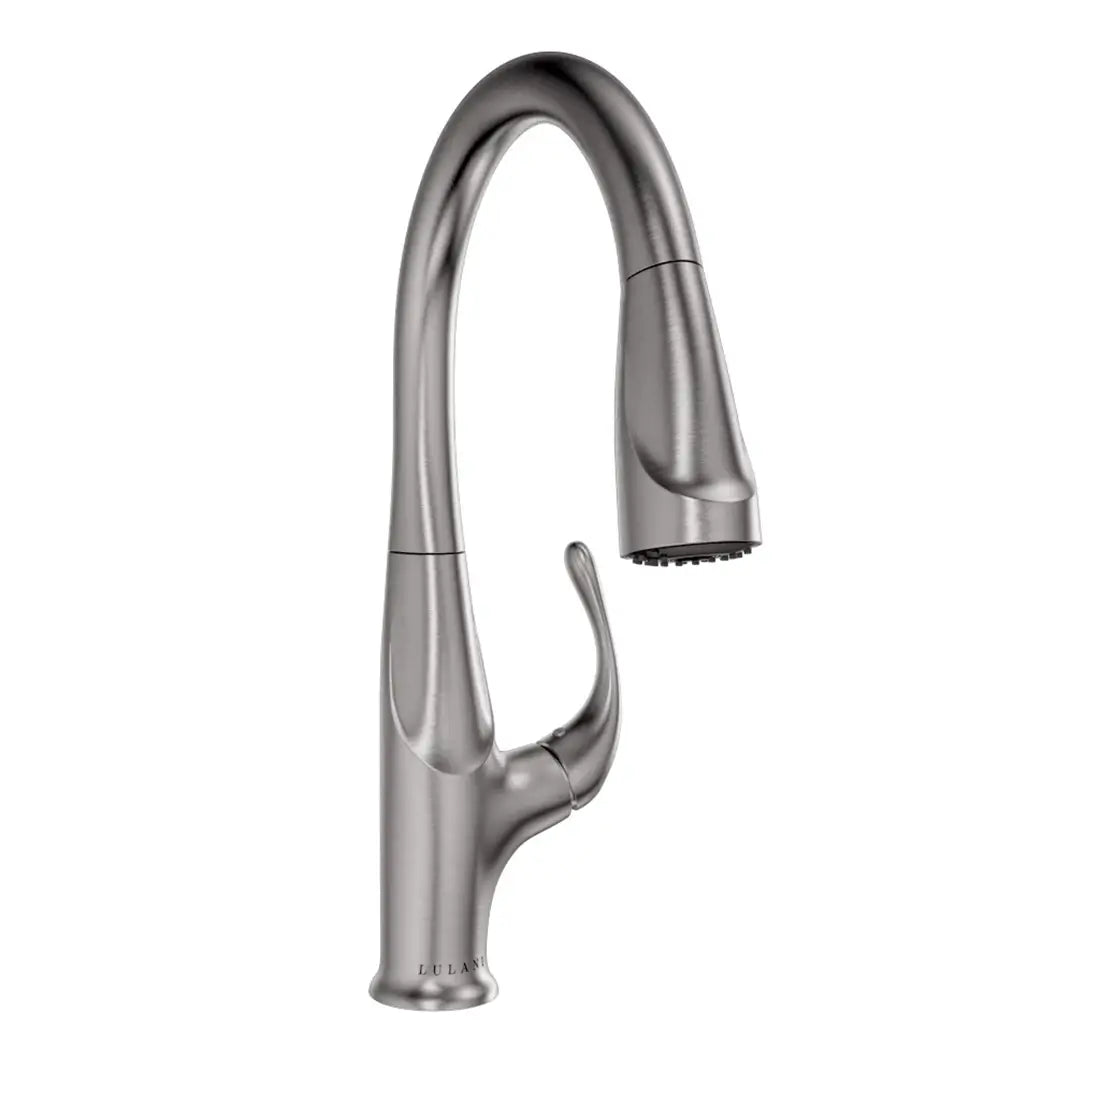 Lulani Kauai Brushed Nickel 1.8 GPM Single Handle 3-Function Pull-Down Spray Head 360 Swivel Spout Faucet With Baseplate